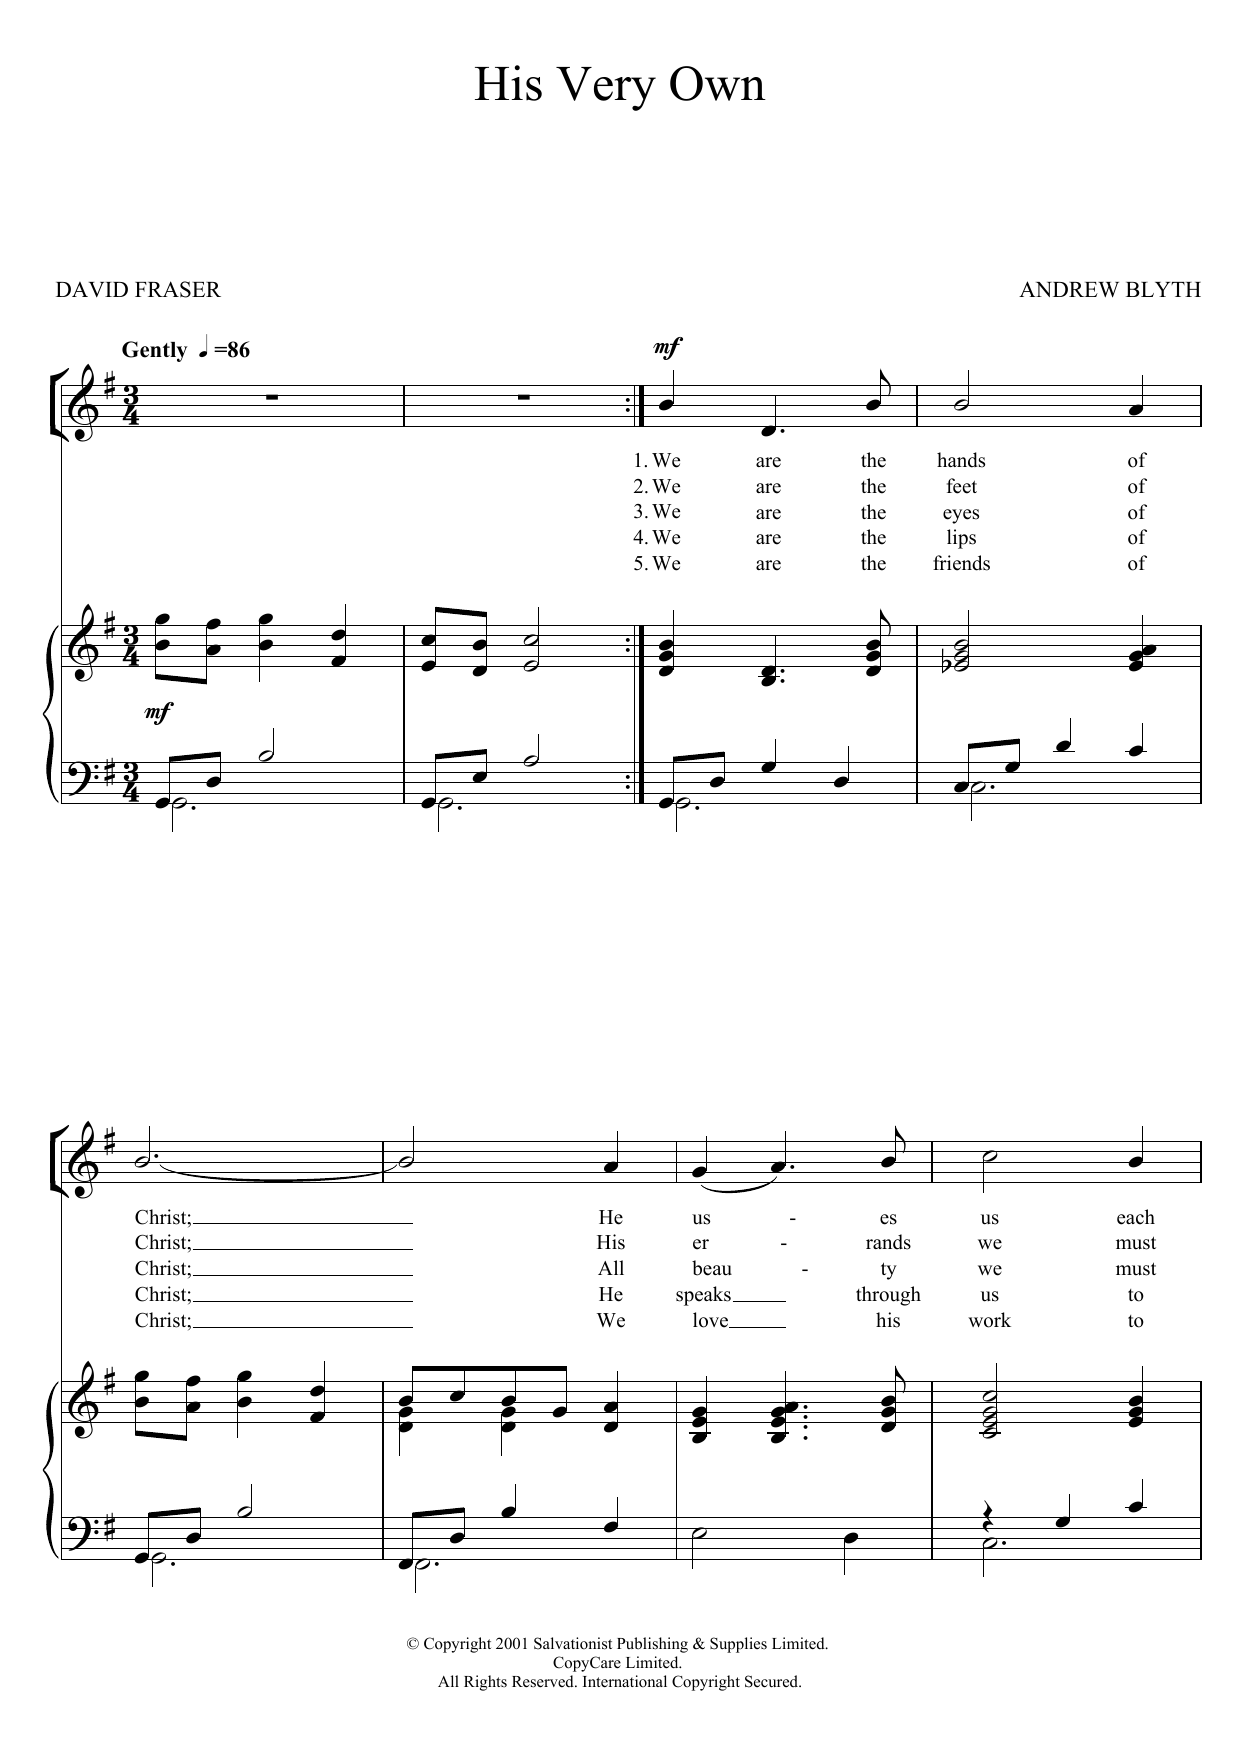 Download The Salvation Army His Very Own Sheet Music